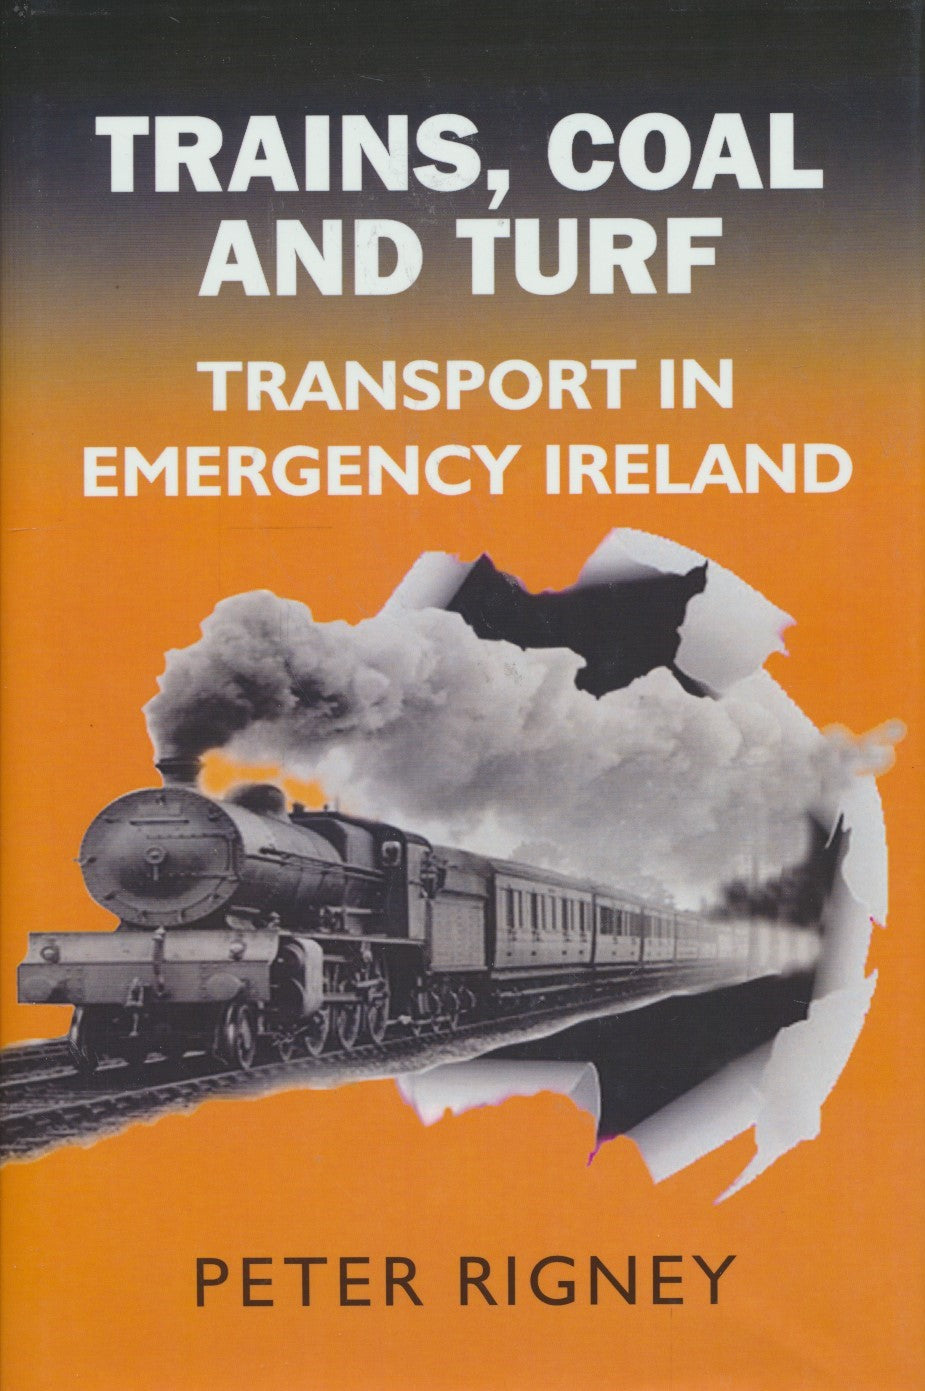 Trains, Coal and Turf: Transport in Emergency Ireland